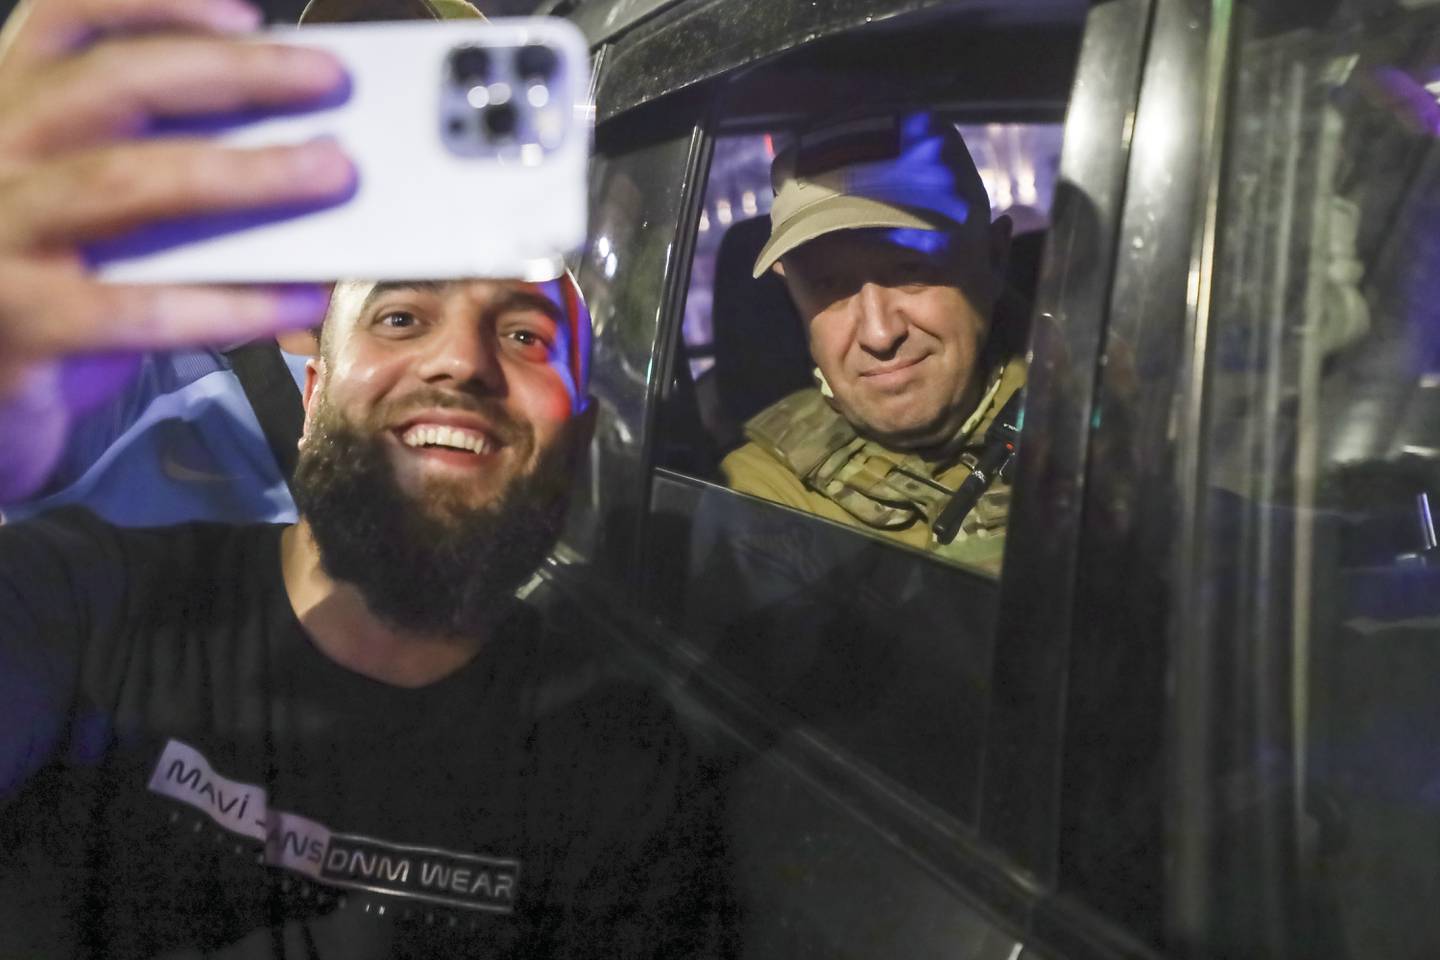 Yevgeny Prigozhin, the owner of the Wagner Group military company, right, sits inside a military vehicle posing for a selfie photo with a local civilian on a street in Rostov-on-Don, Russia, Saturday, June 24, 2023, prior to leaving an area of the headquarters of the Southern Military District.